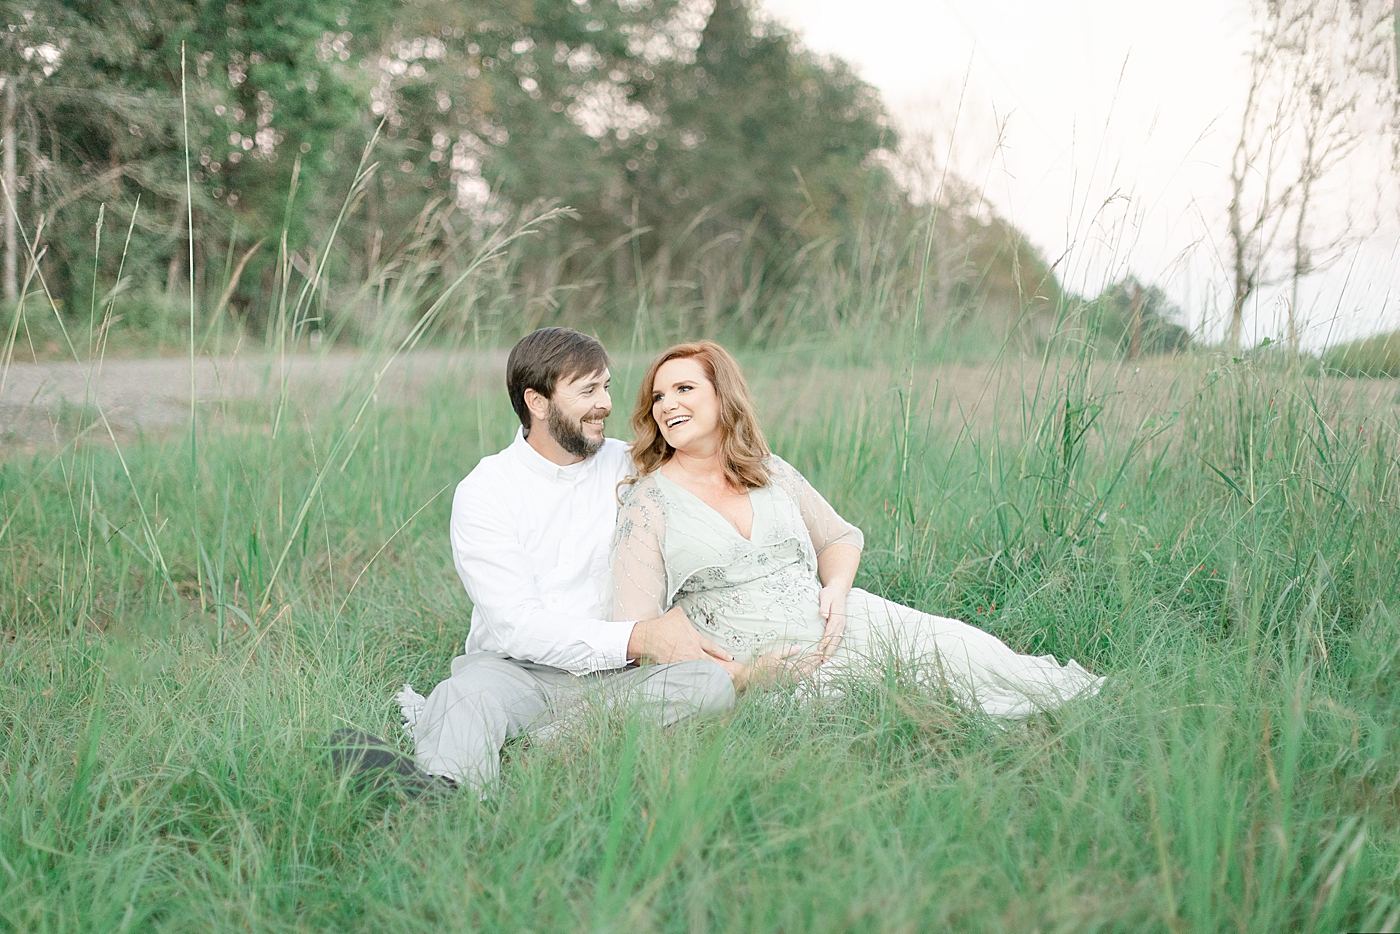 Mother and father laughing together | Photo by Ocean Springs MS Maternity Photographer Little Sunshine Photography 